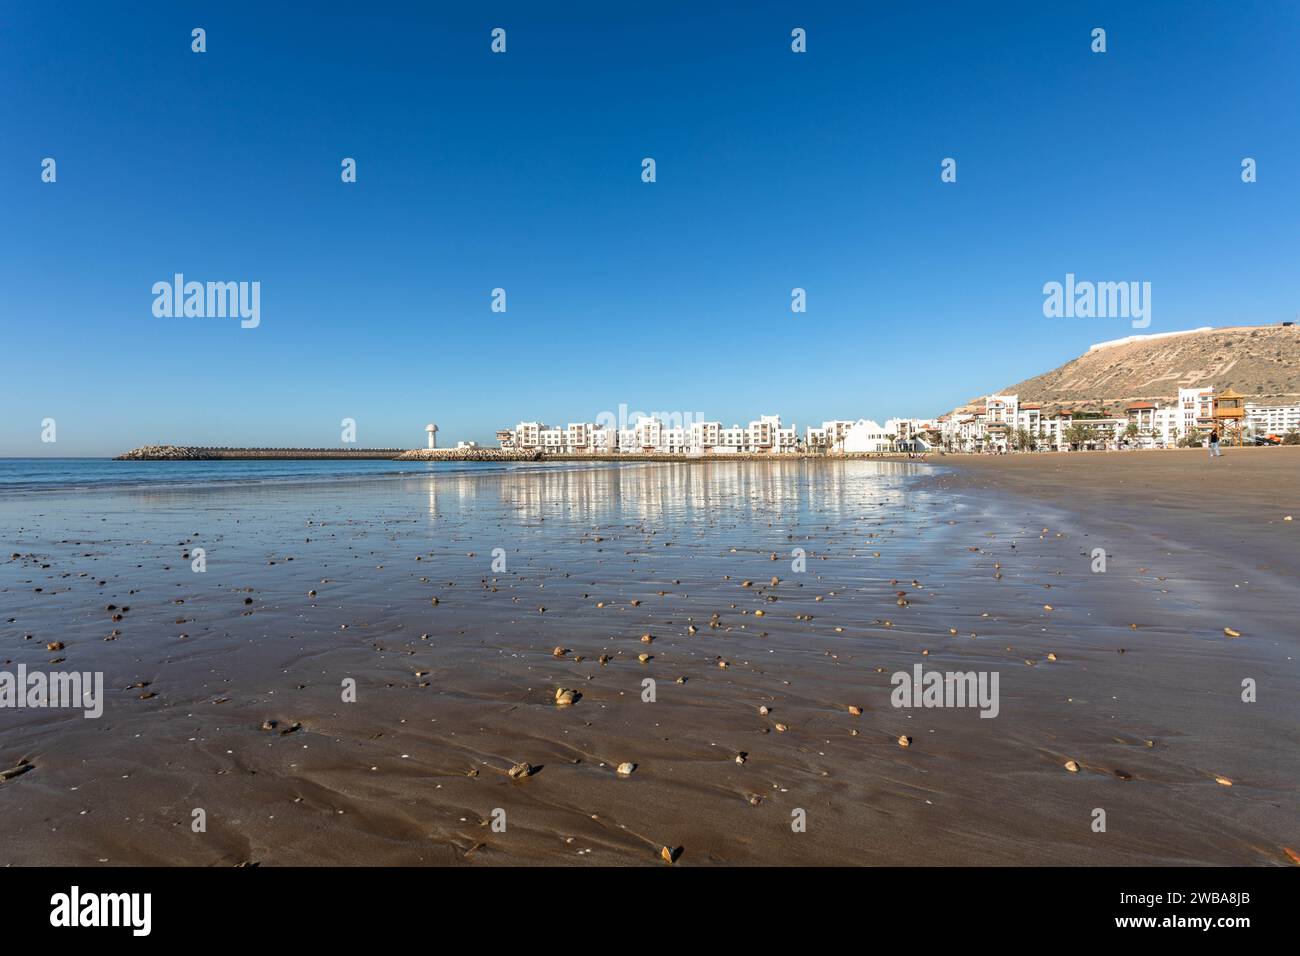 Panoramic view of Agadir Beach with tide going out, with Kasbah and Marina in the distance Stock Photo